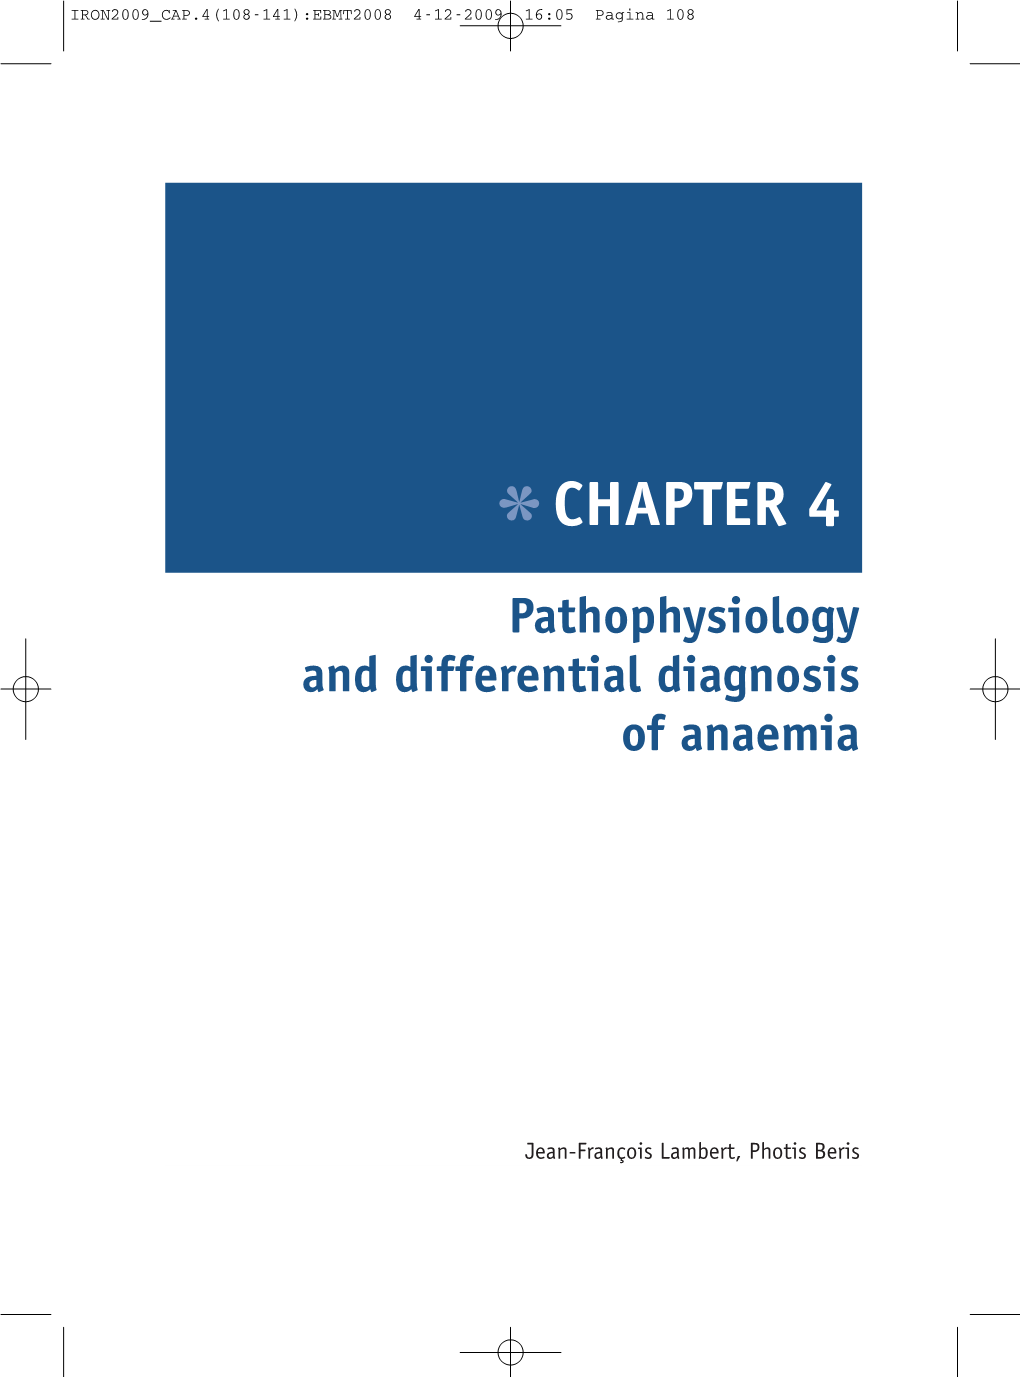 CHAPTER 4 Pathophysiology and Differential Diagnosis of Anaemia